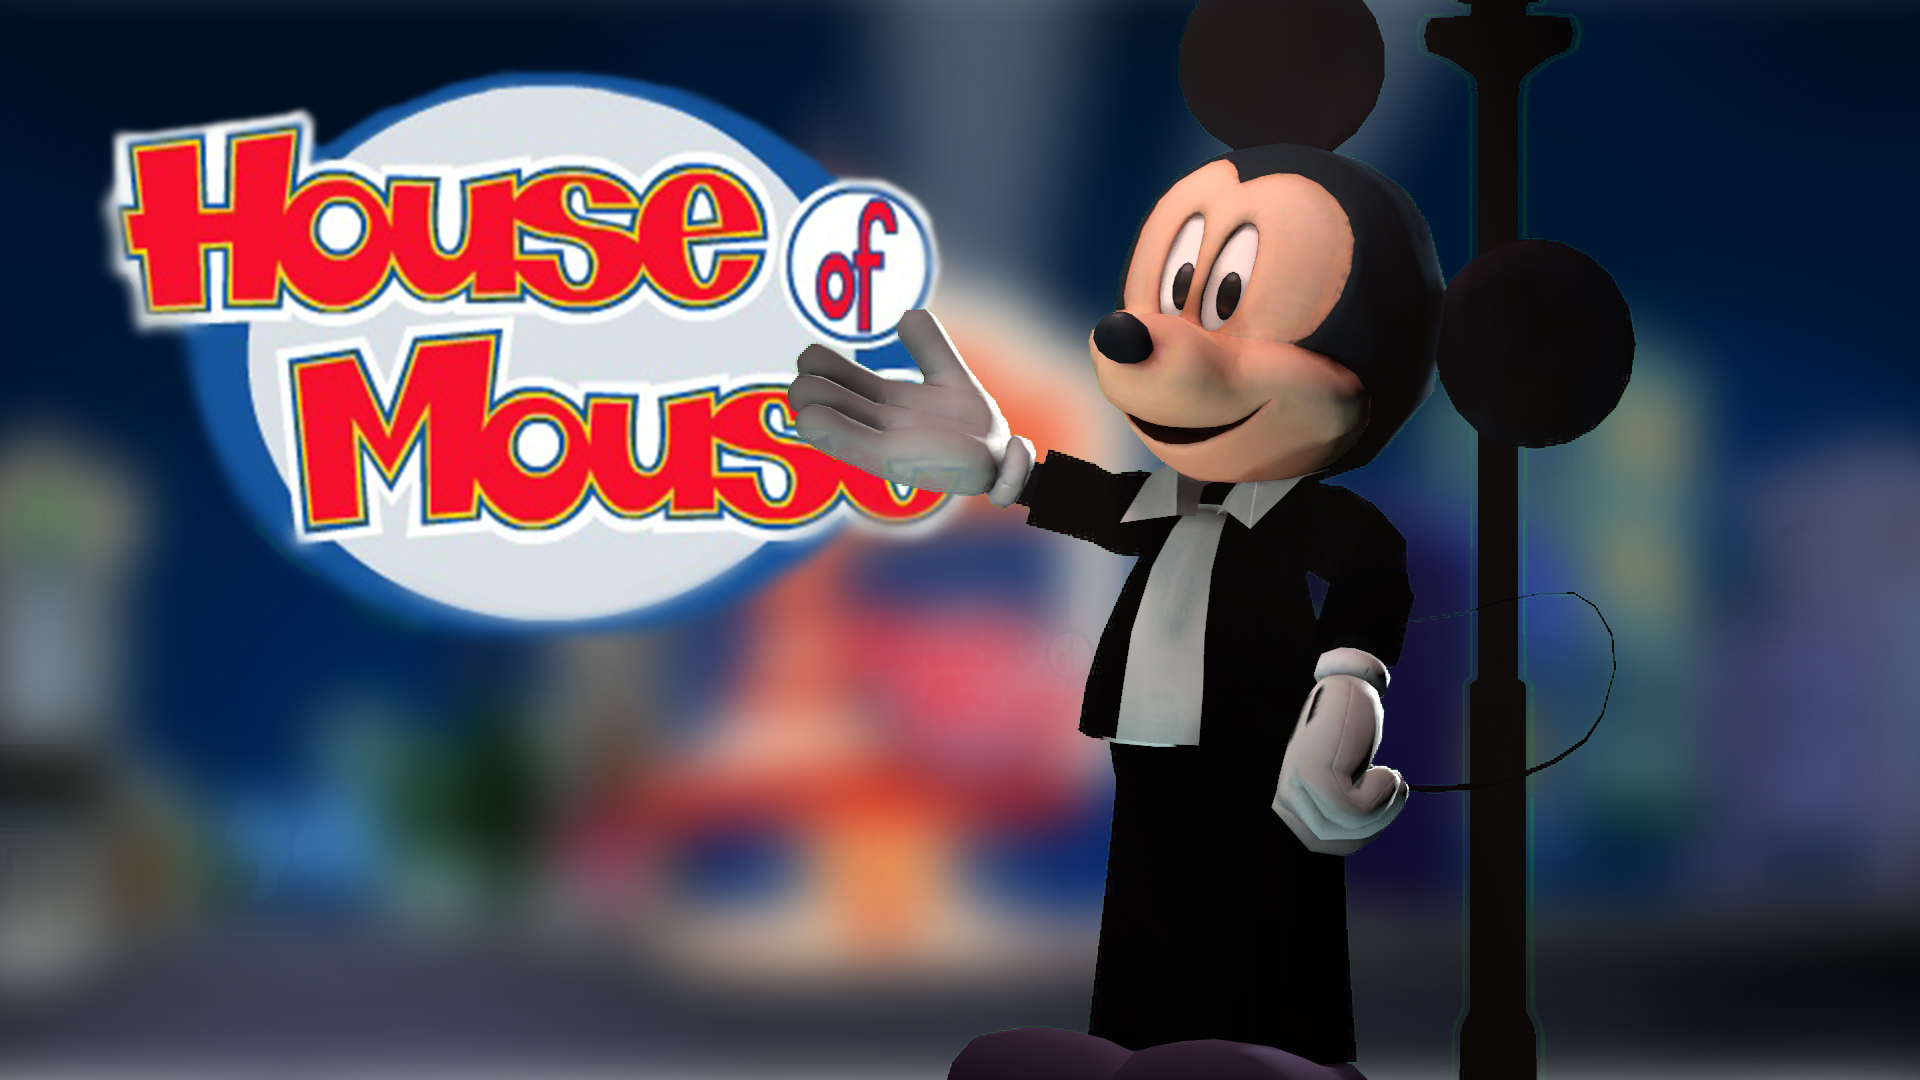 micky mouse house of mouse